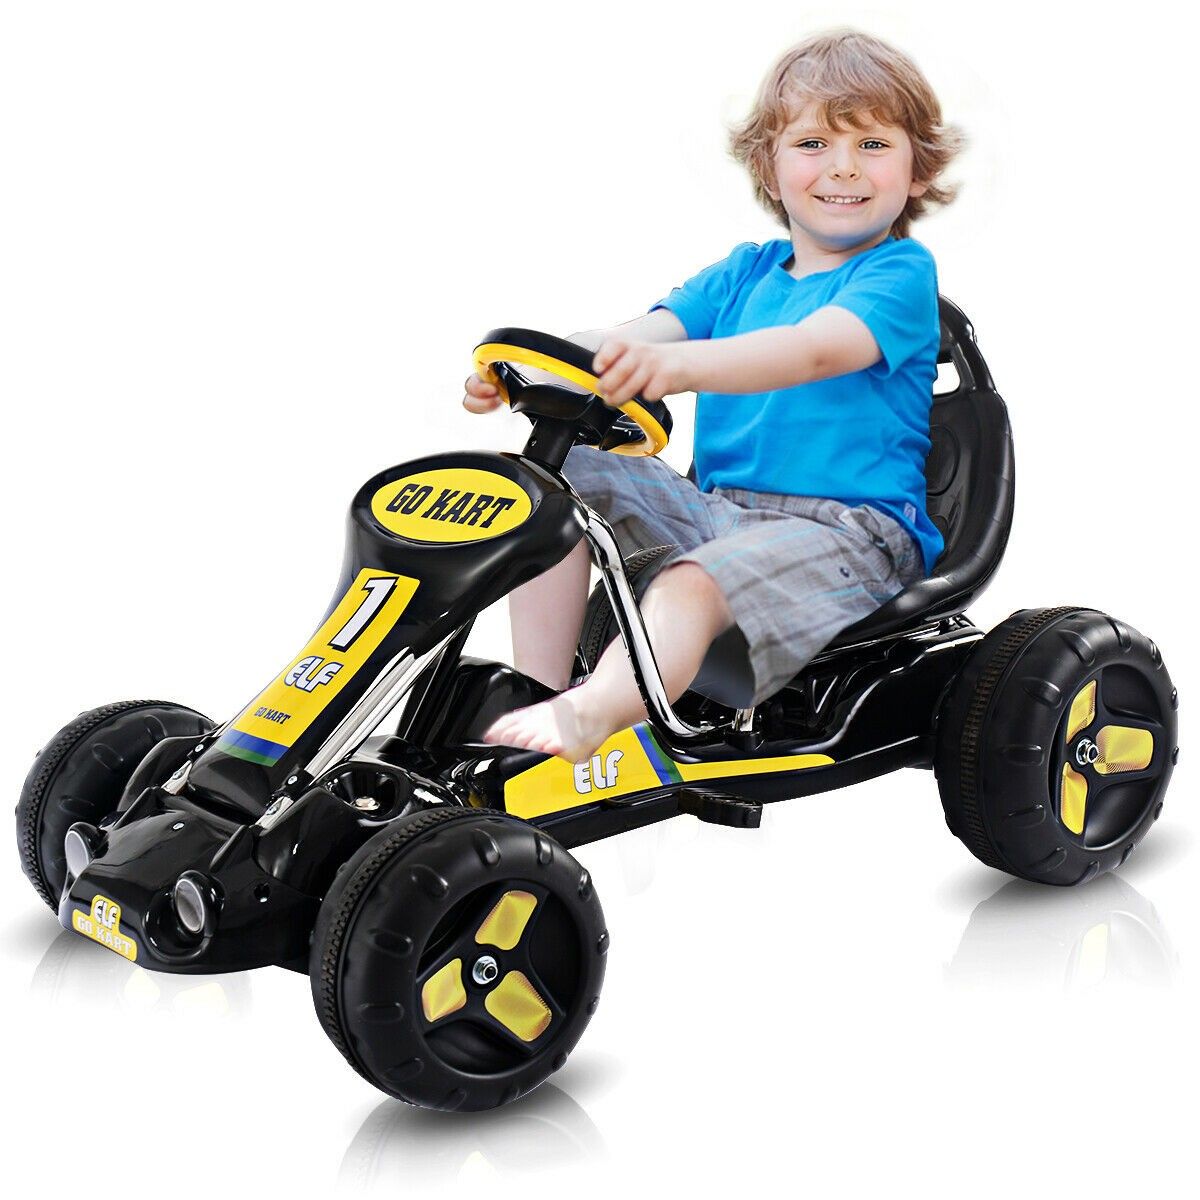 TY324116BK Go Kart Kids Ride On Car Pedal Powered Car 4 Wheel Racer Toy Stealth Outdoor